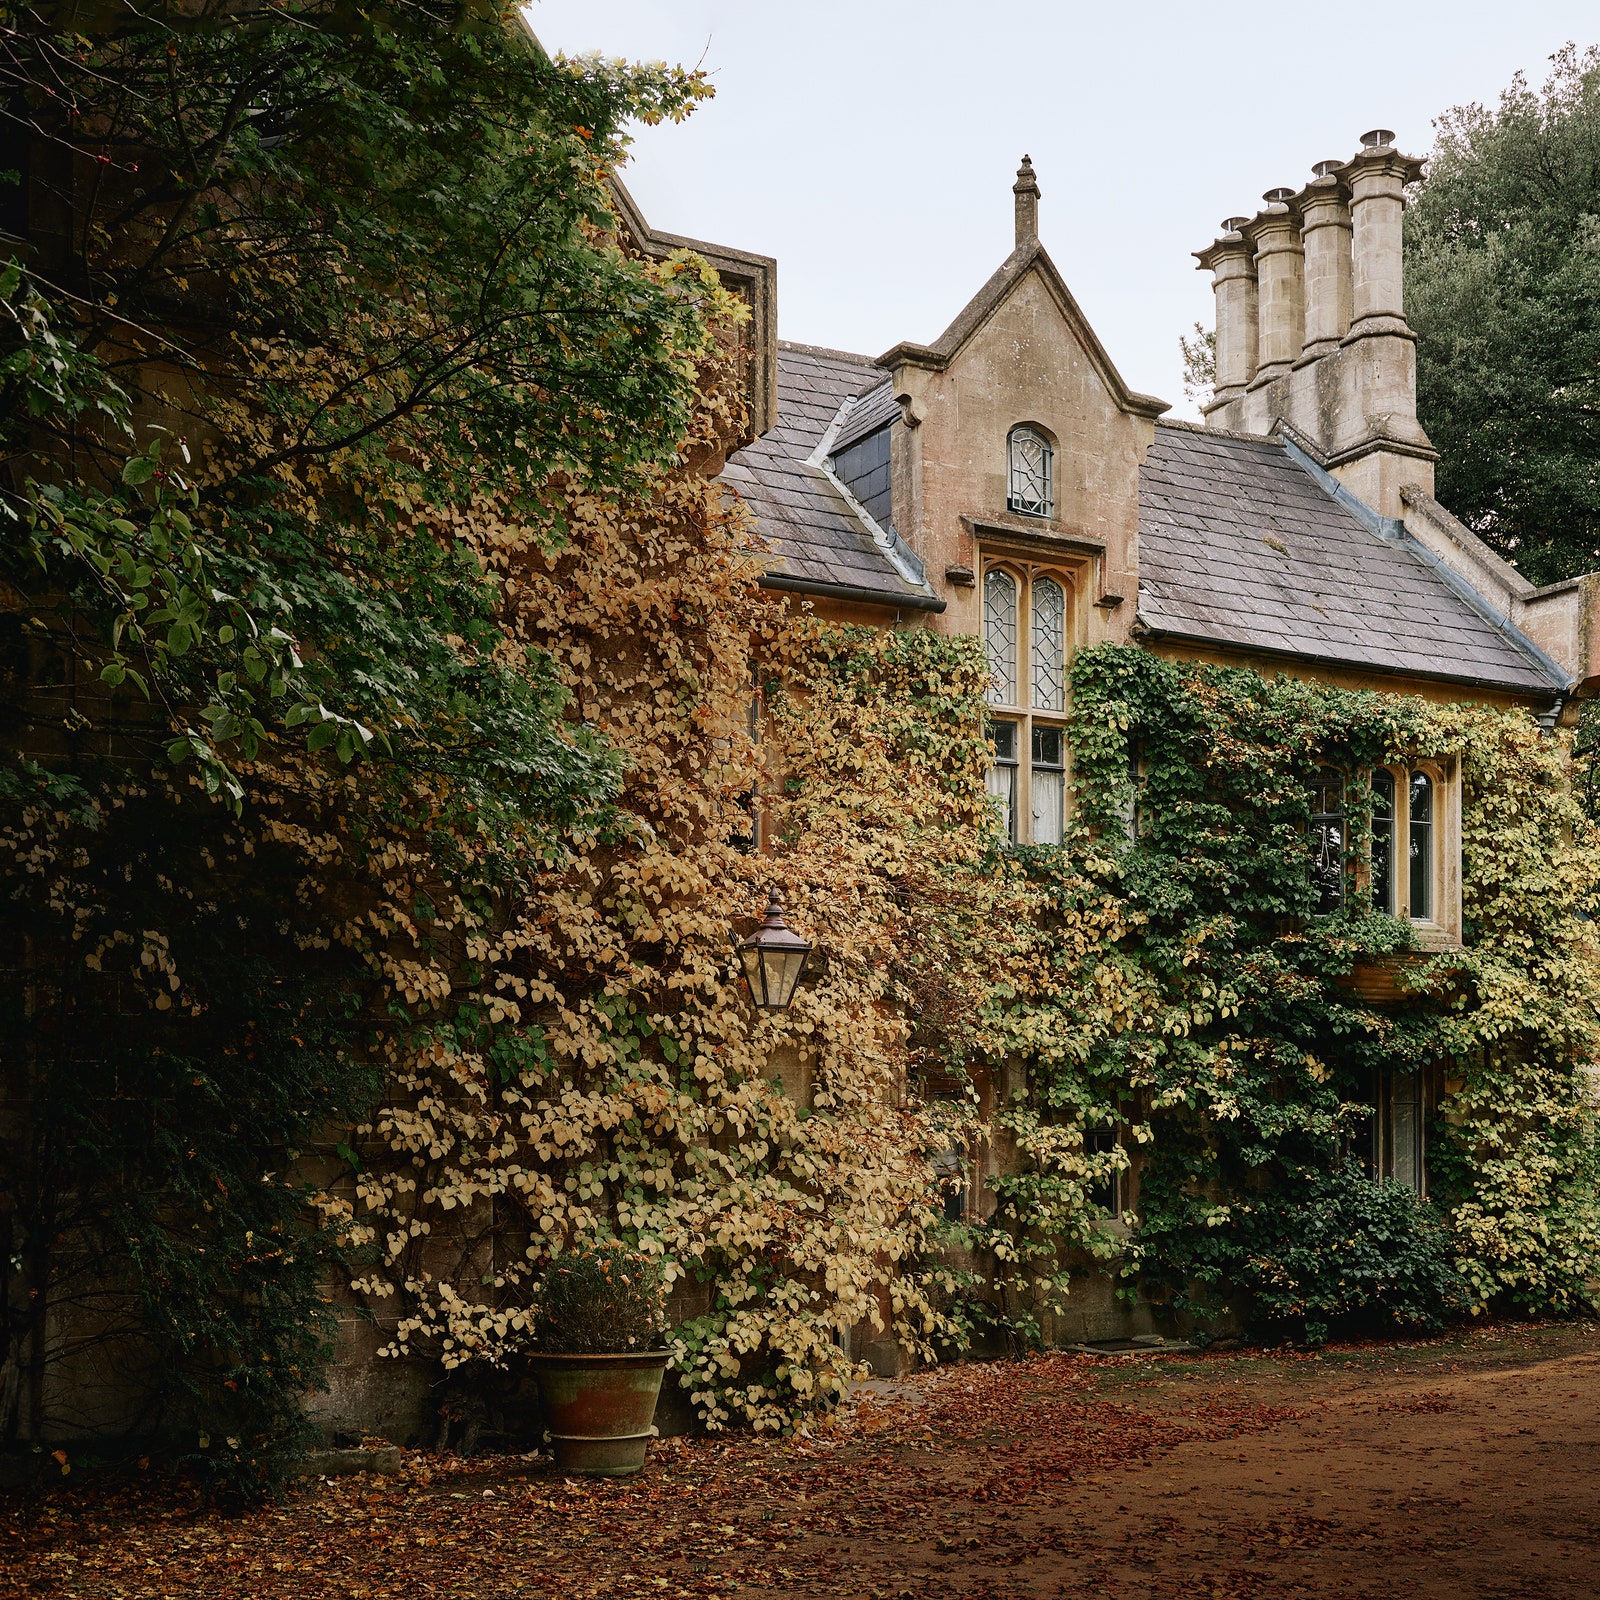 Anna Haines brings harmony to a former vicarage outside Bath